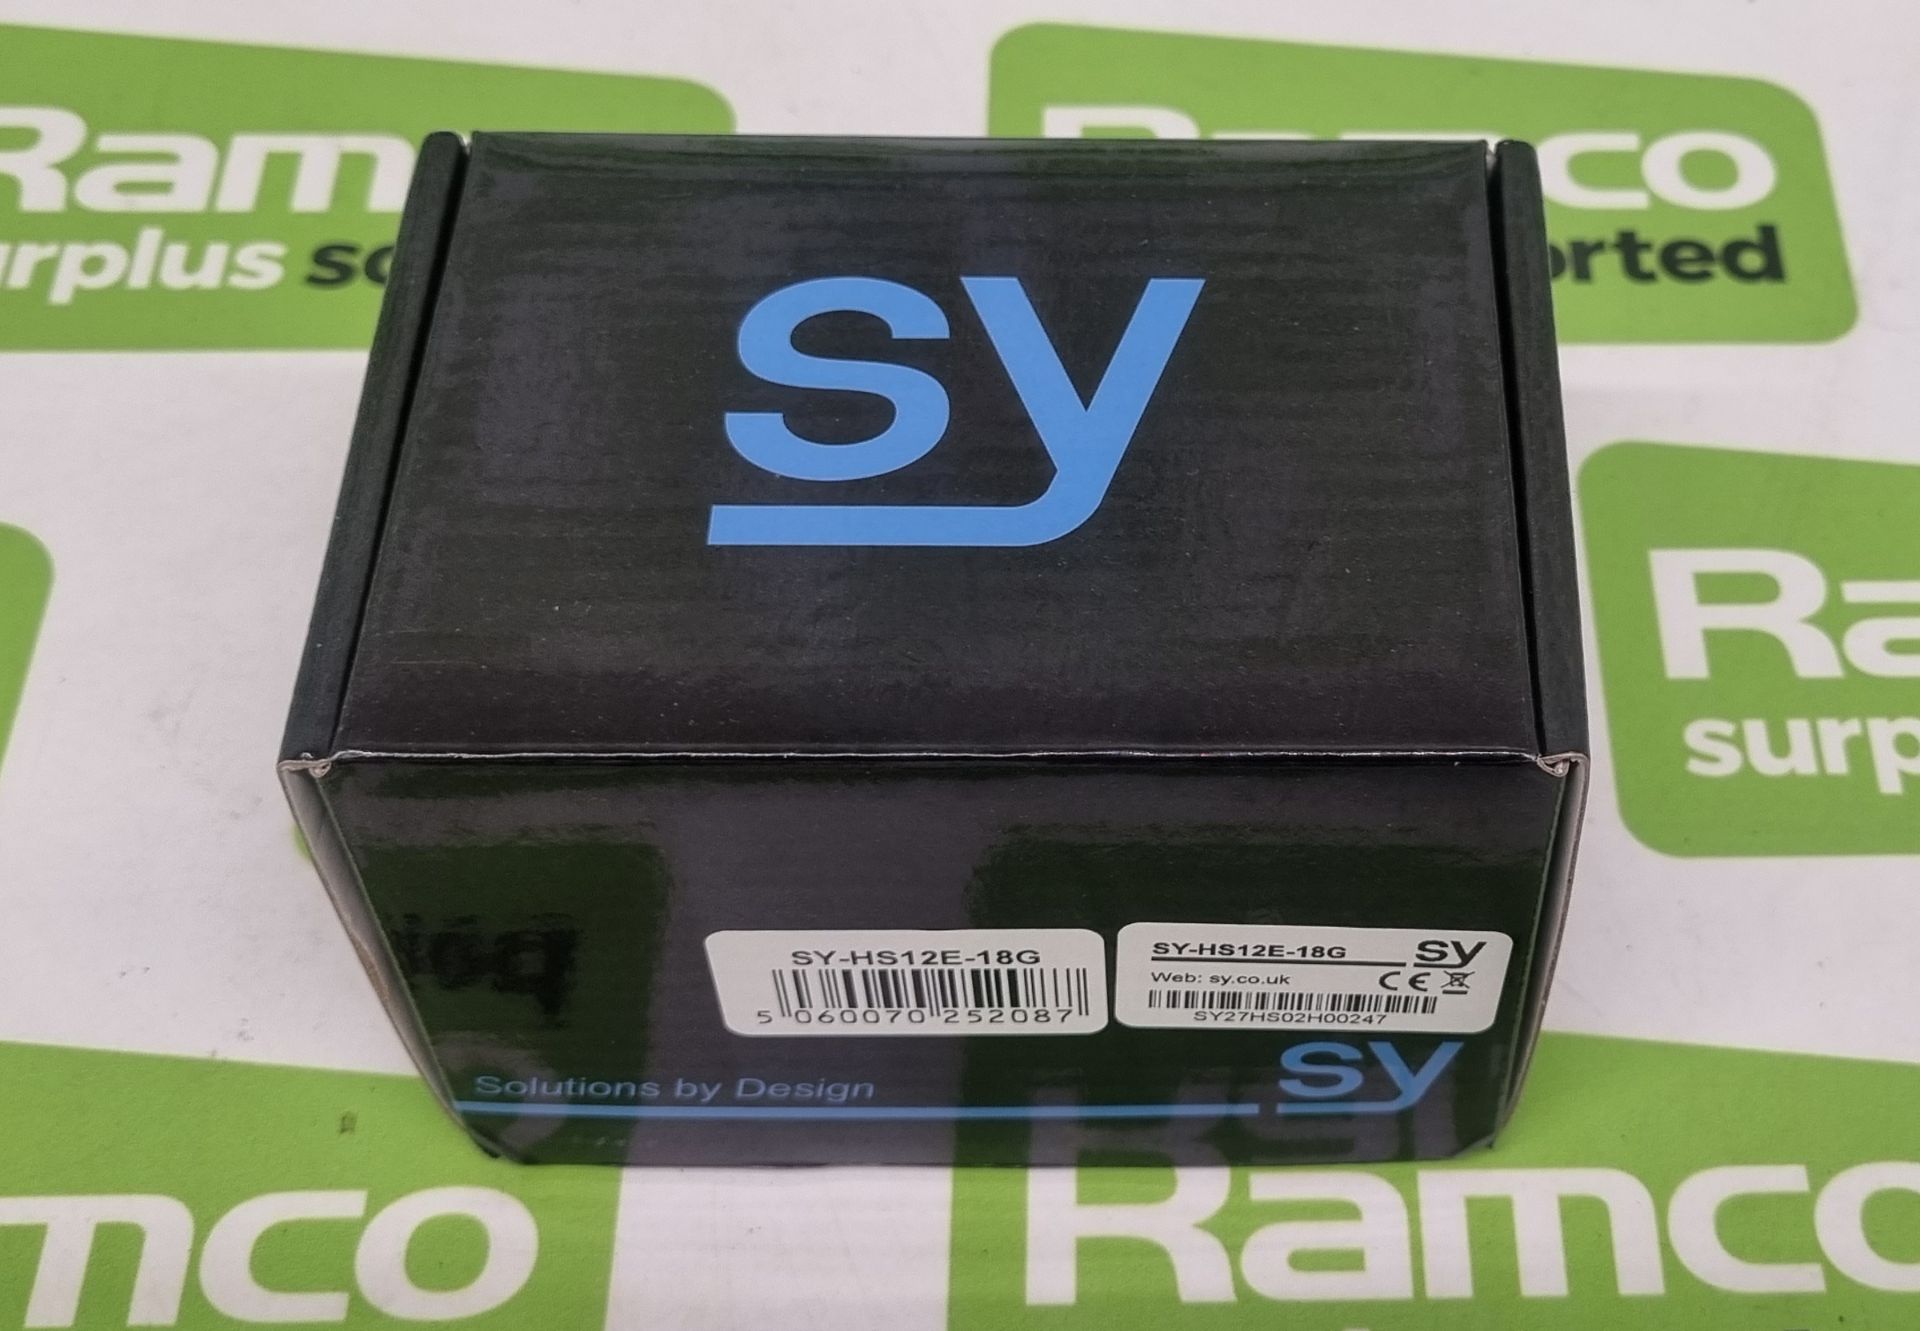 SY-HS12E-18G 1x2 HDMI 2.0 (18Gbps) splitter - Image 2 of 7